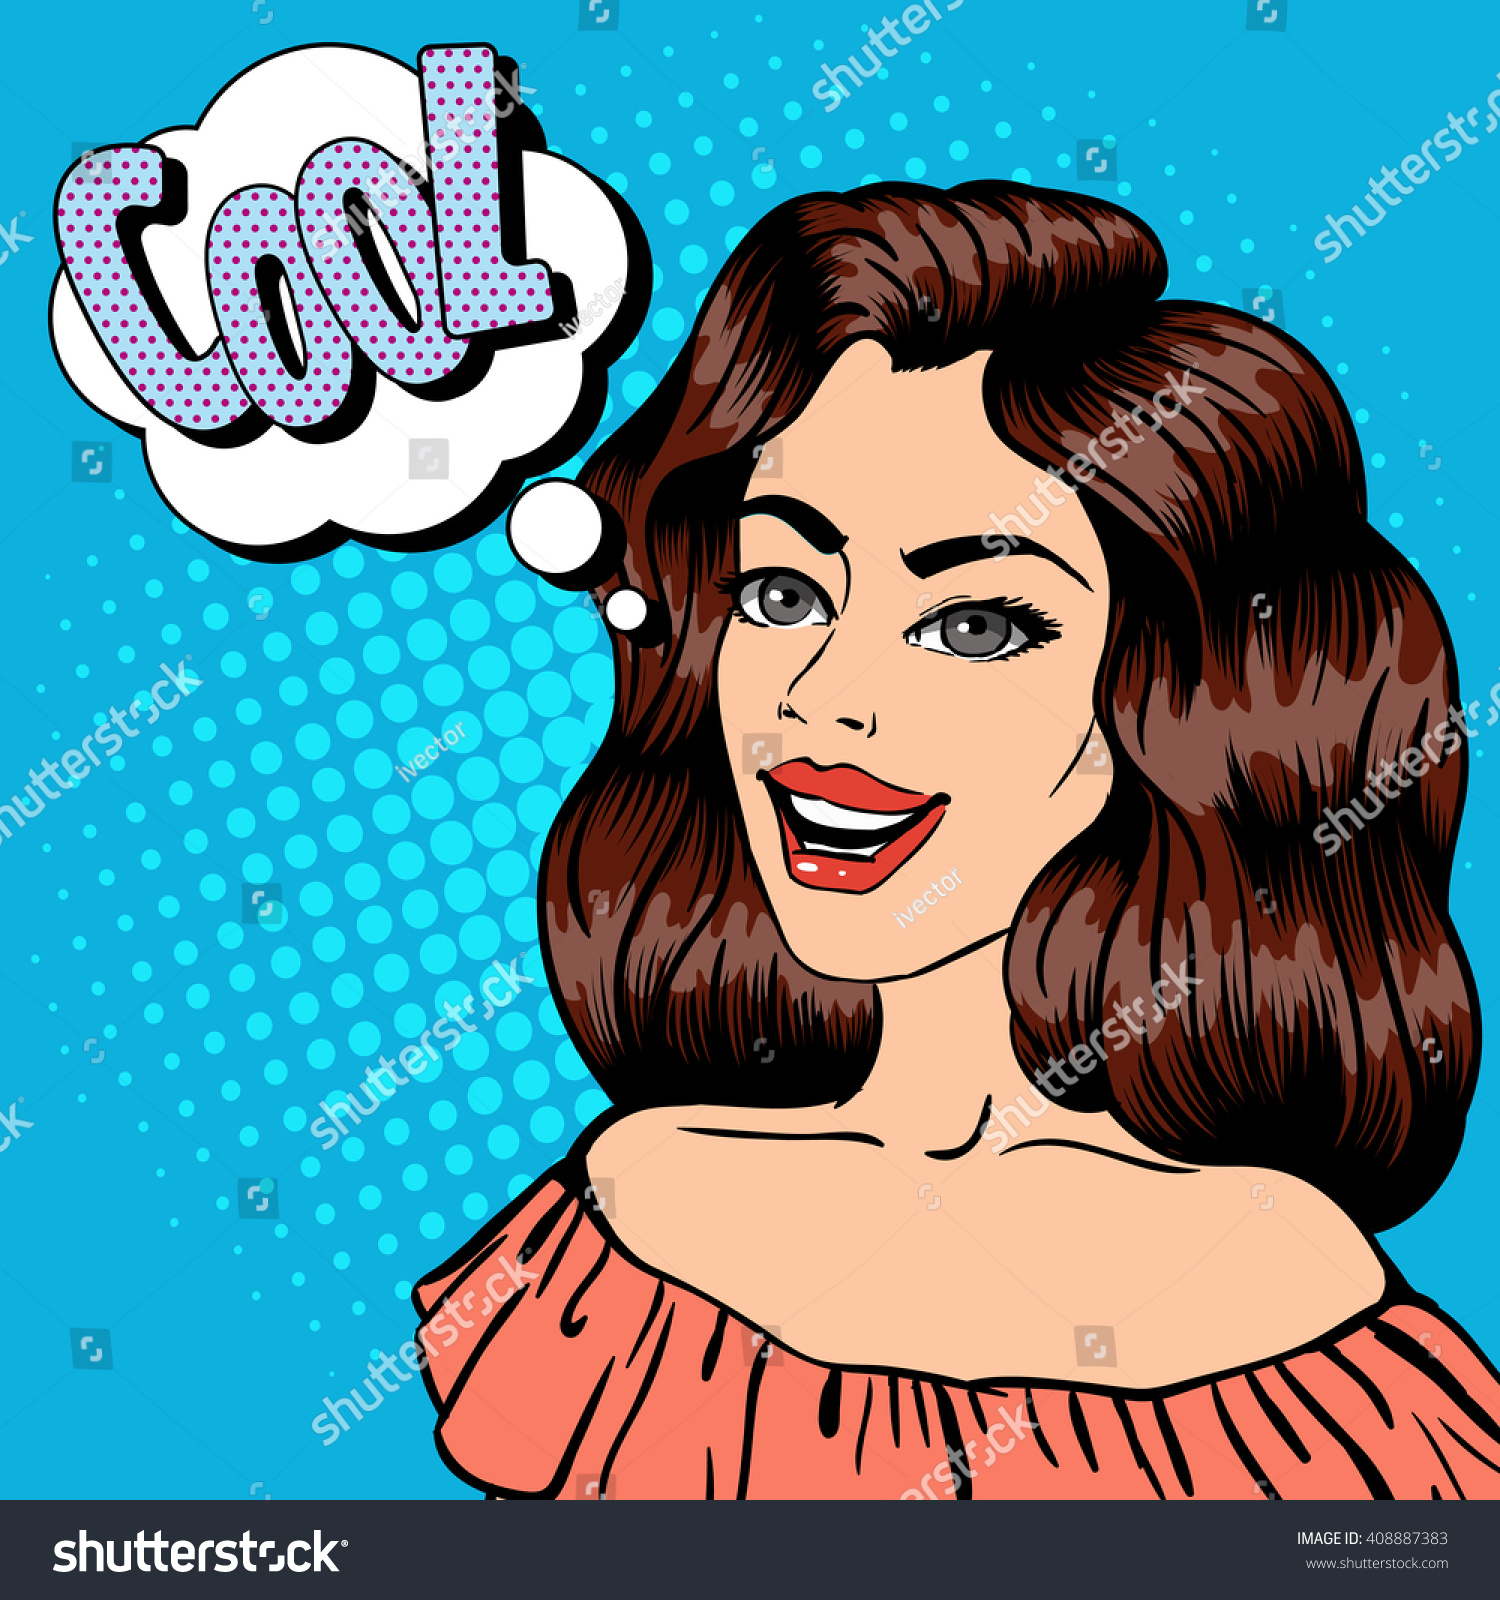 Beautiful Woman Expression Cool Pop Art Stock Vector Royalty Free 408887383